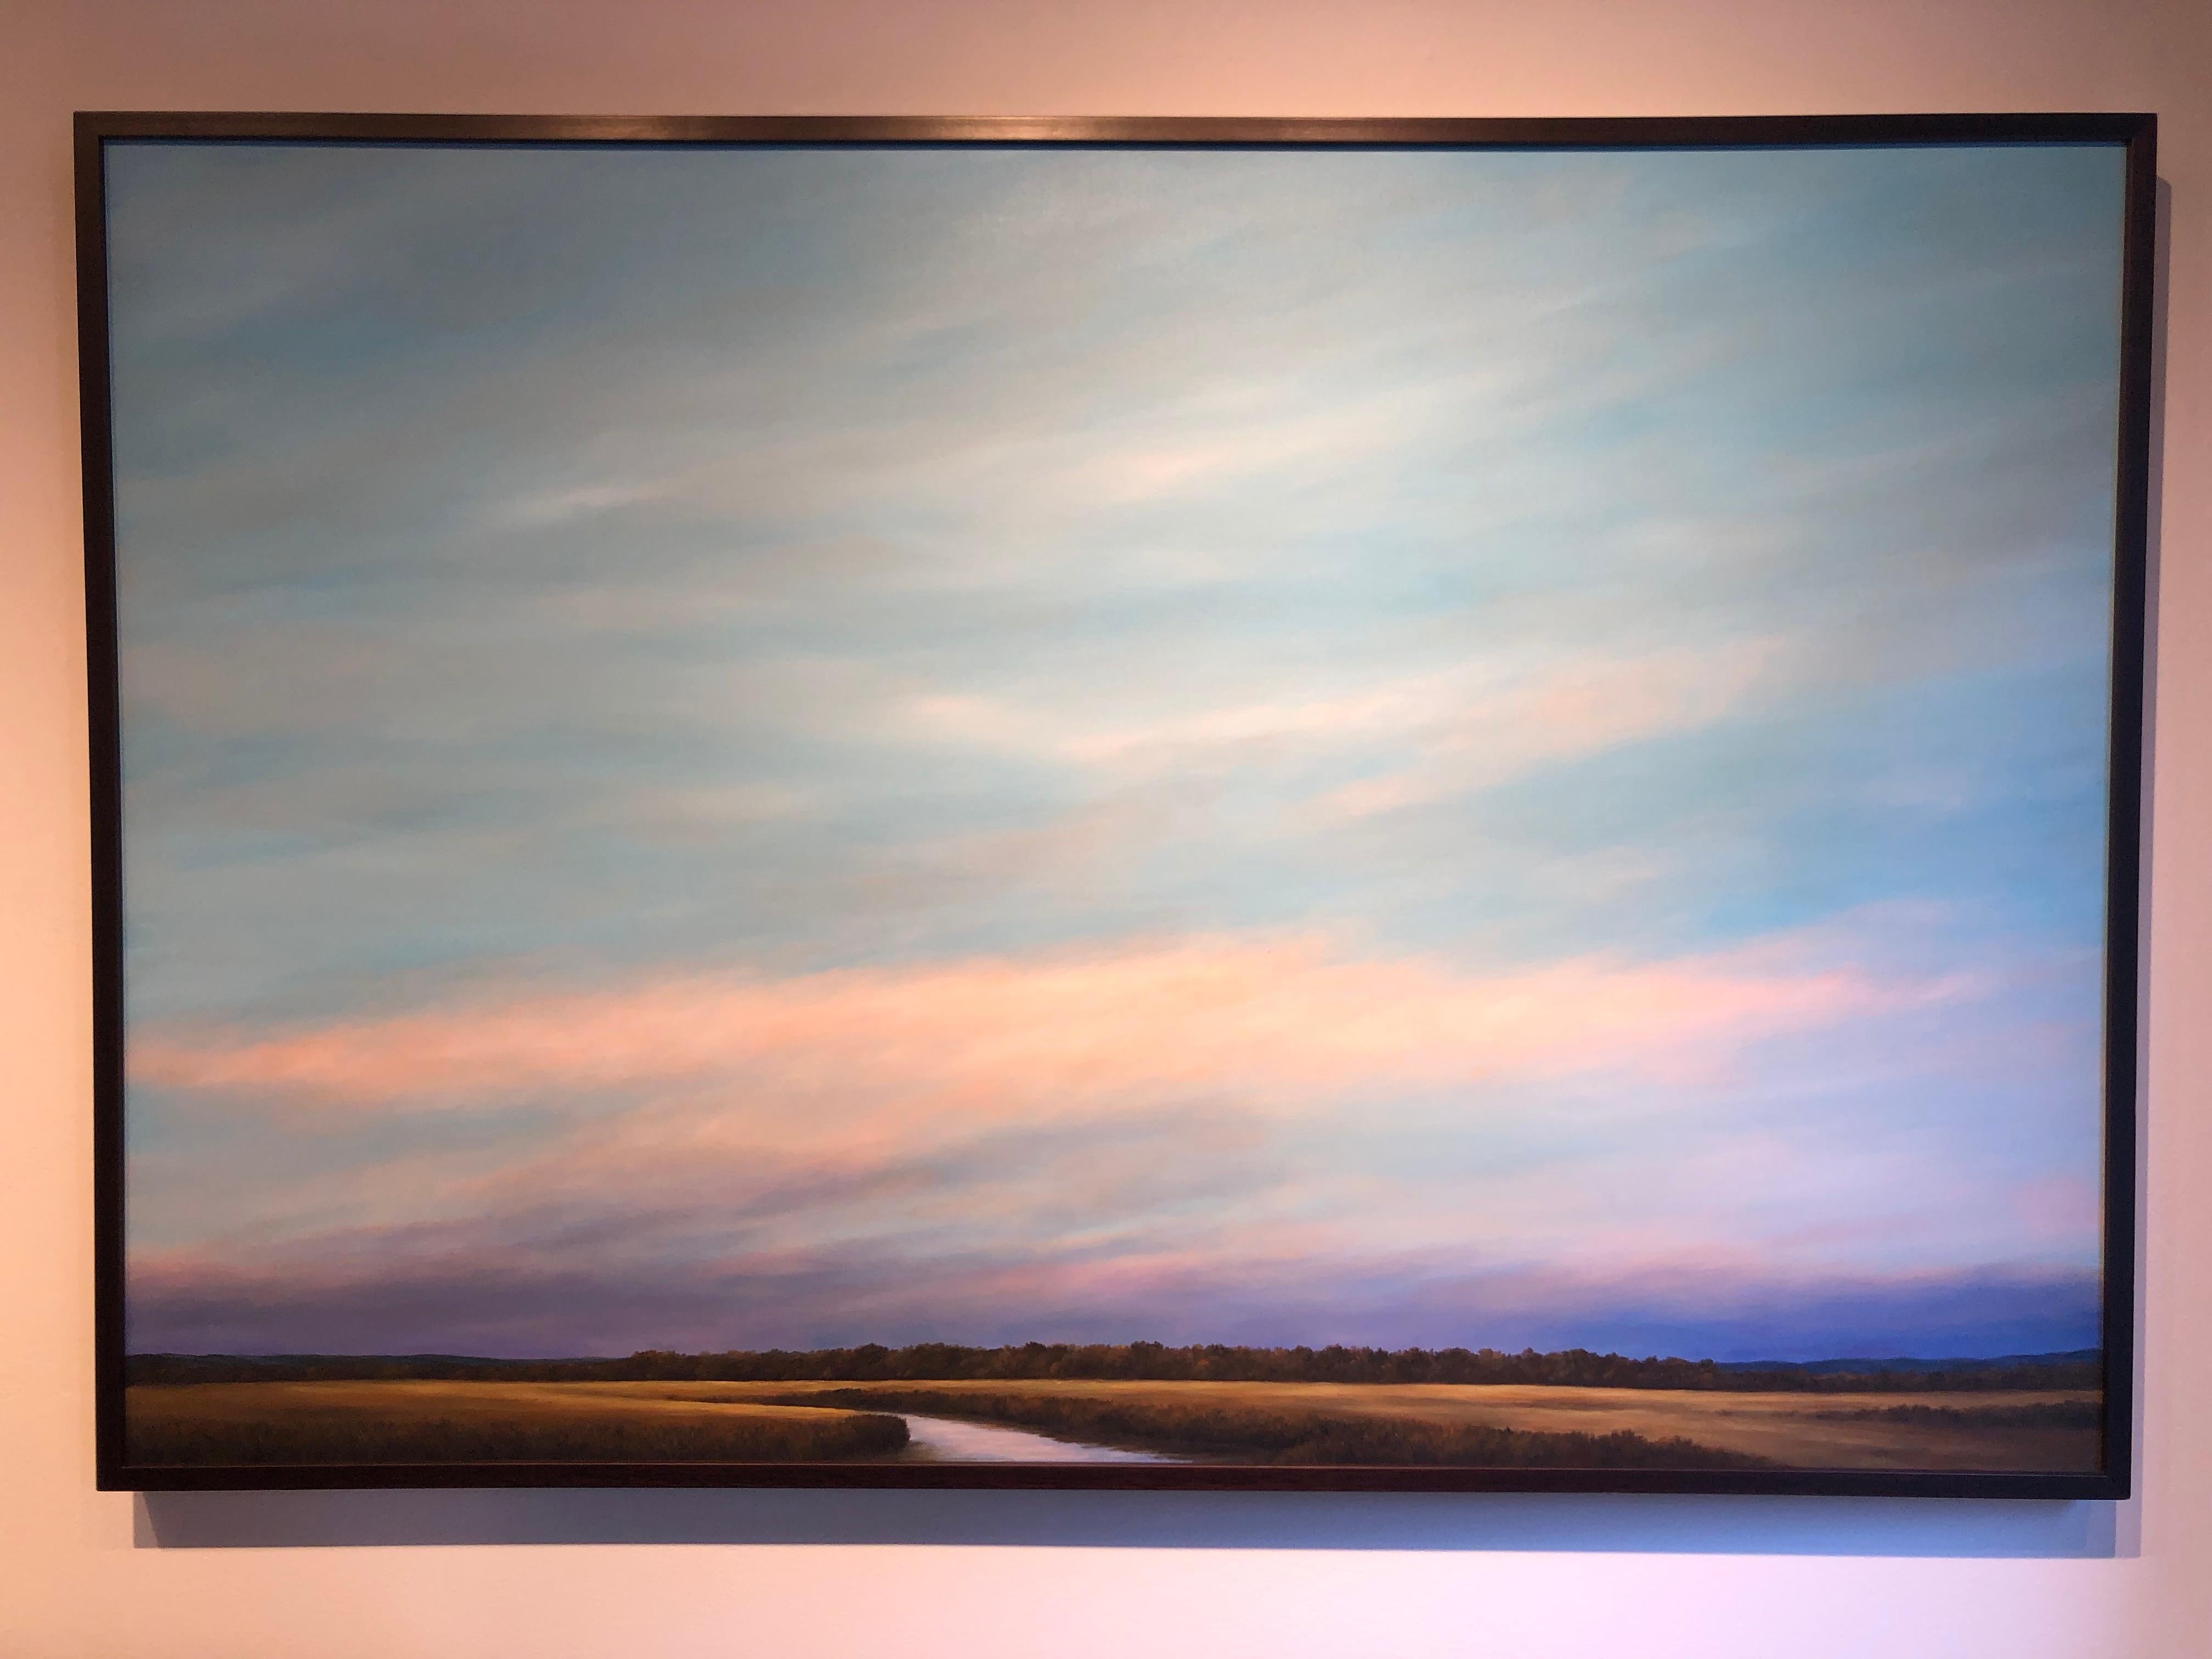 This medium to large sized minimalist painting depicts subtle shift of color from moody tones of blue to pink hued clouds and a vibrant purple horizon.  These tones reflect in a meandering creek bisecting the landscape in the foreground.

Ahzad